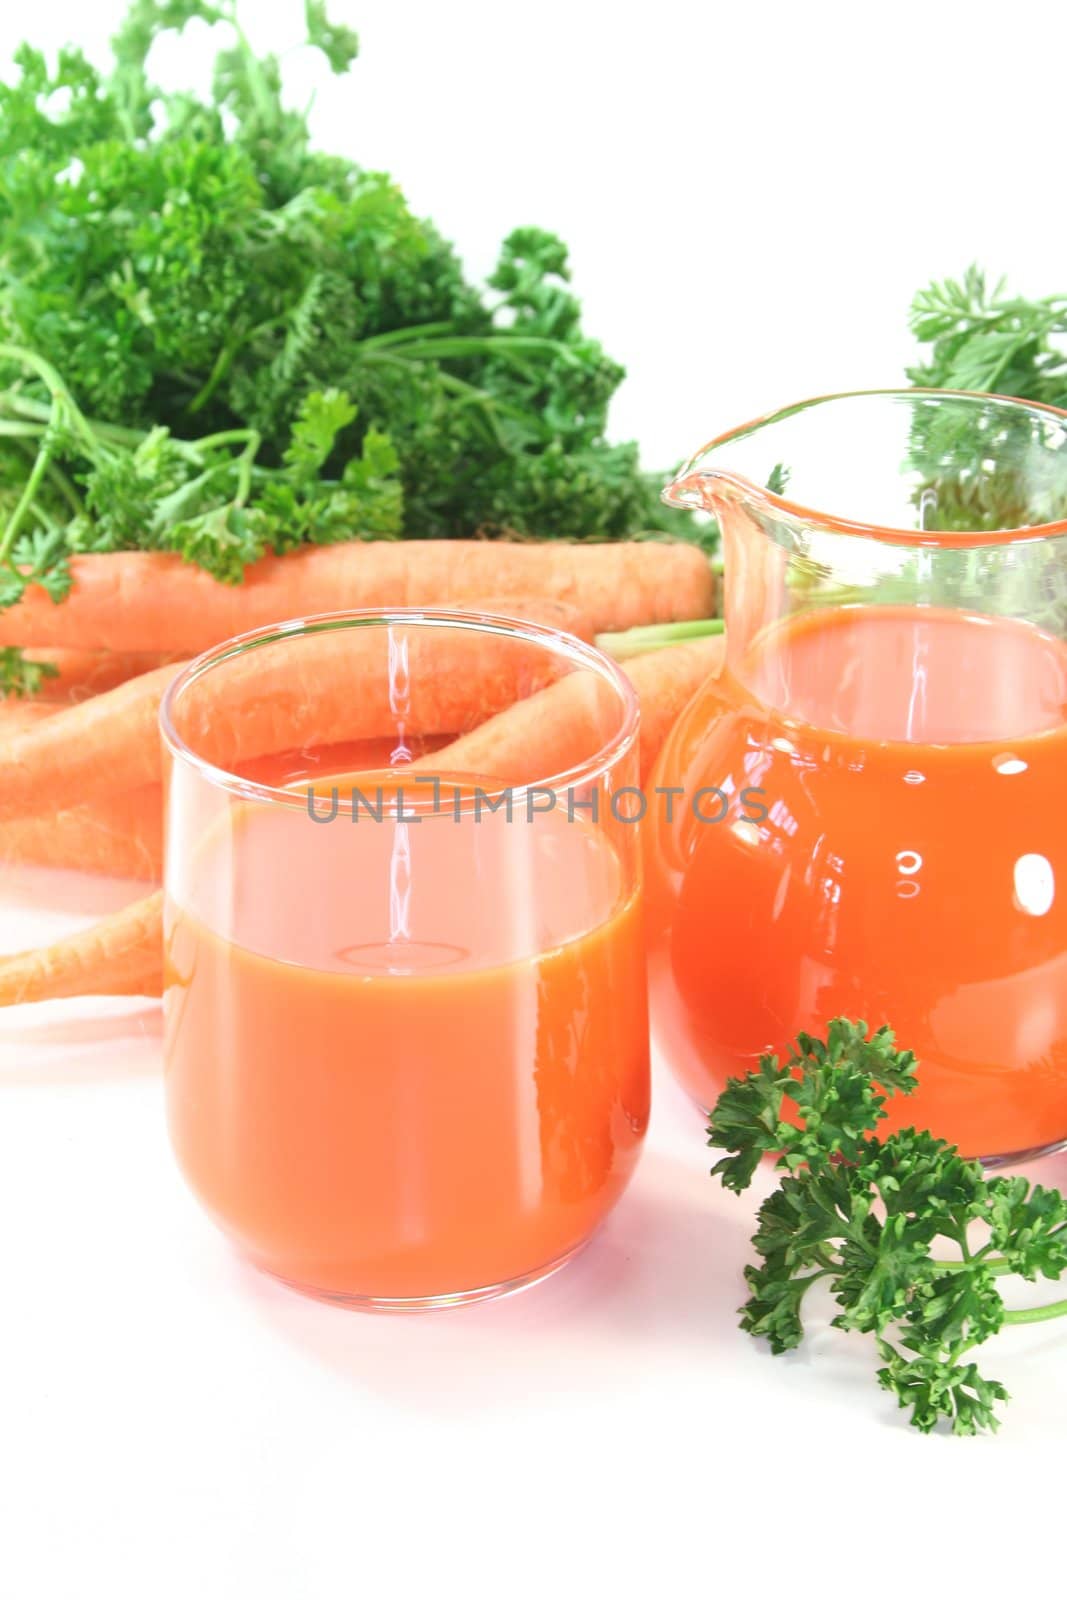 Carrot juice by discovery